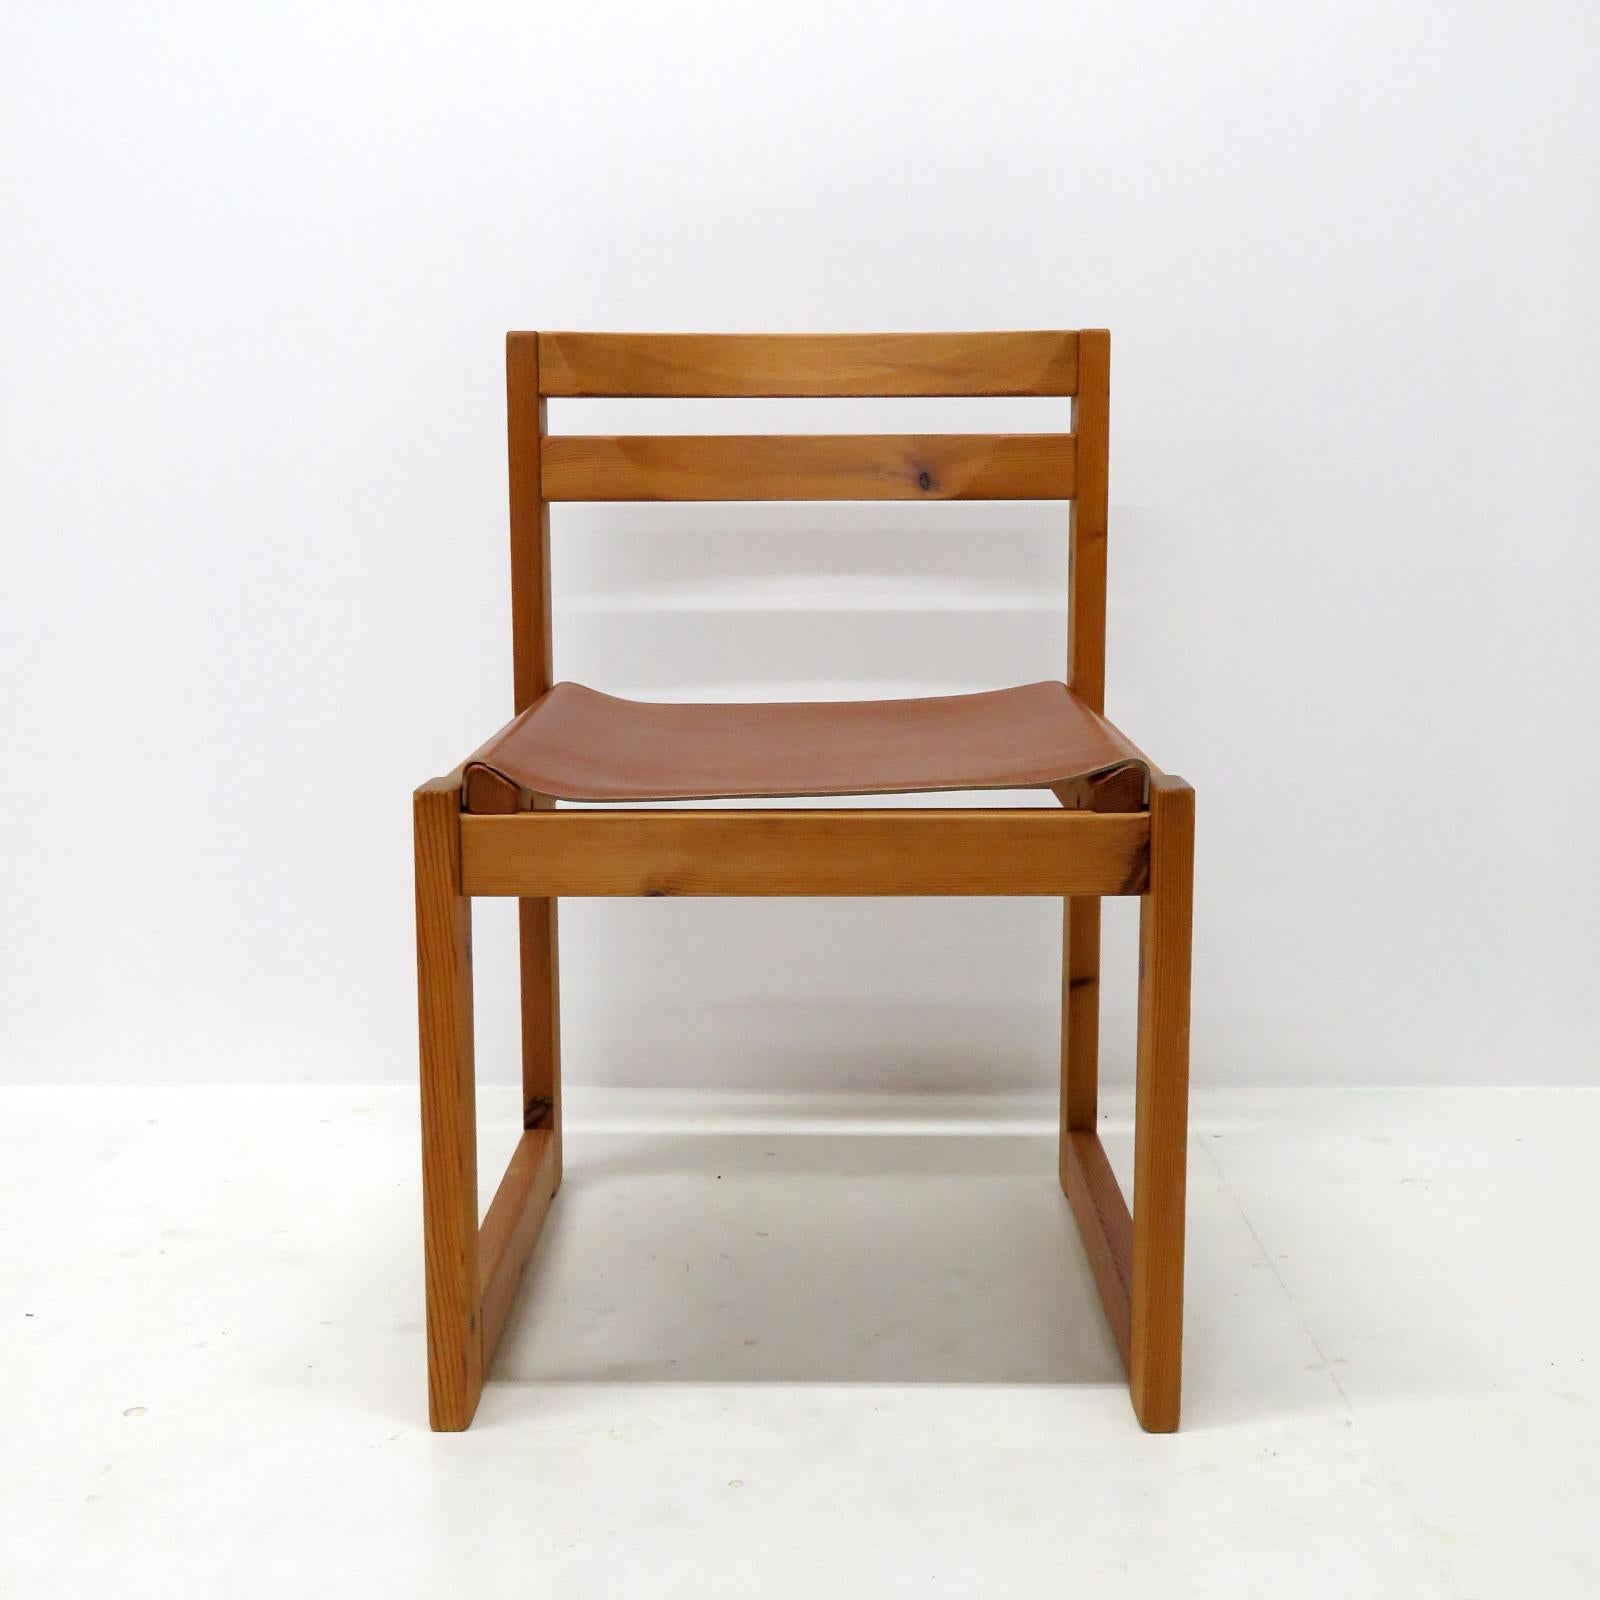 Wonderful dining chair designed by Knud Færch for Sorø Stolefabrik, 1970, with frame in pine and thick leather seat. Four chairs available, price individually.